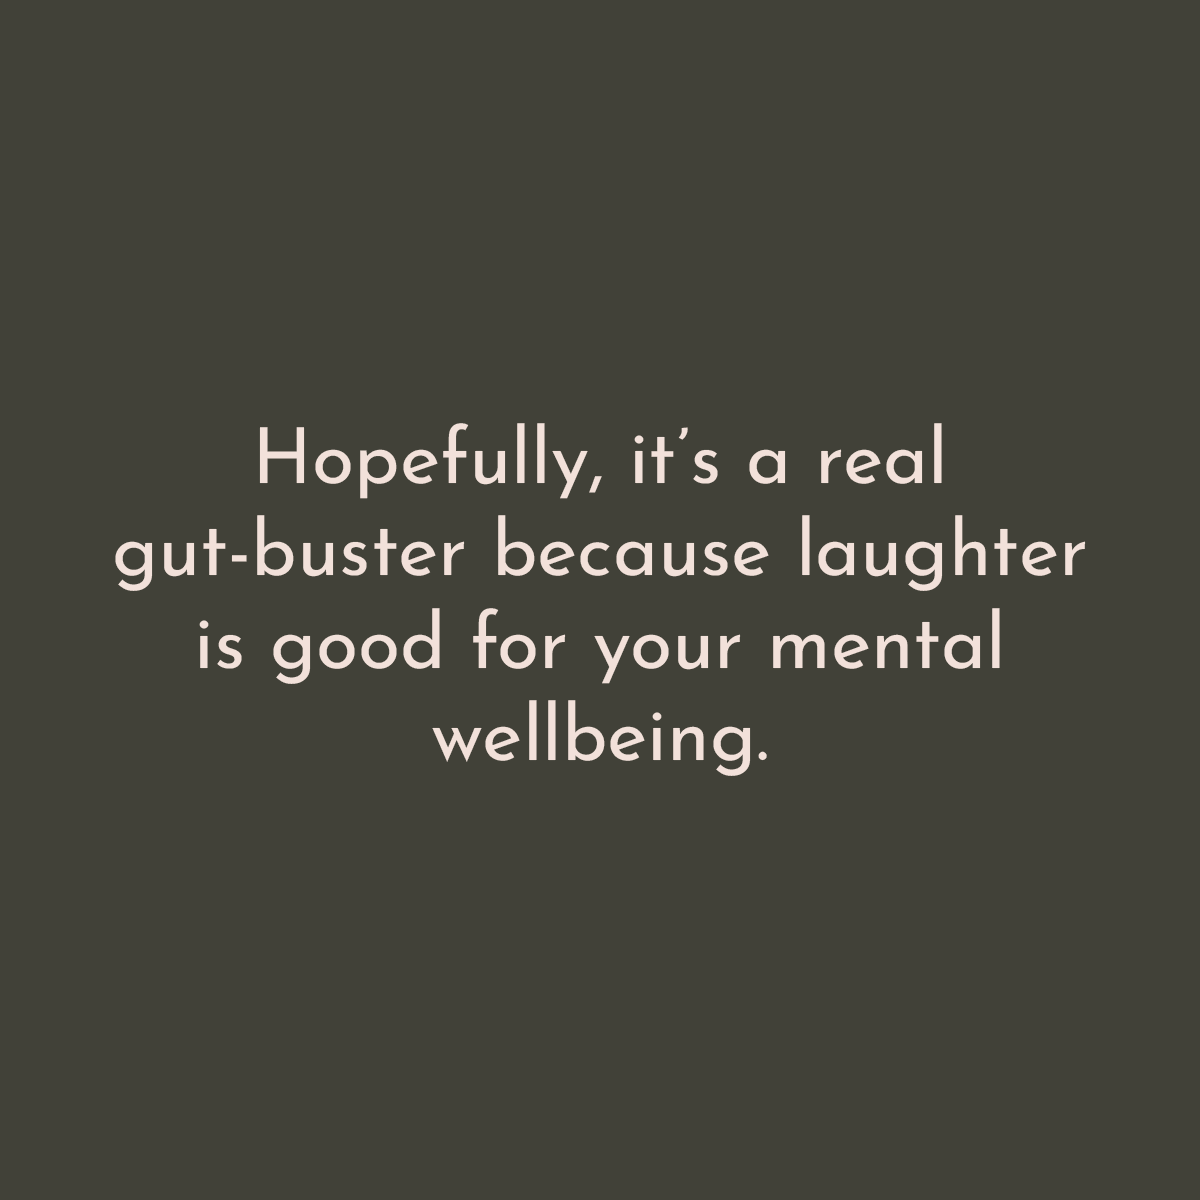 Hopefully, it's a real gut-buster because laughter is good for your mental wellbeing.